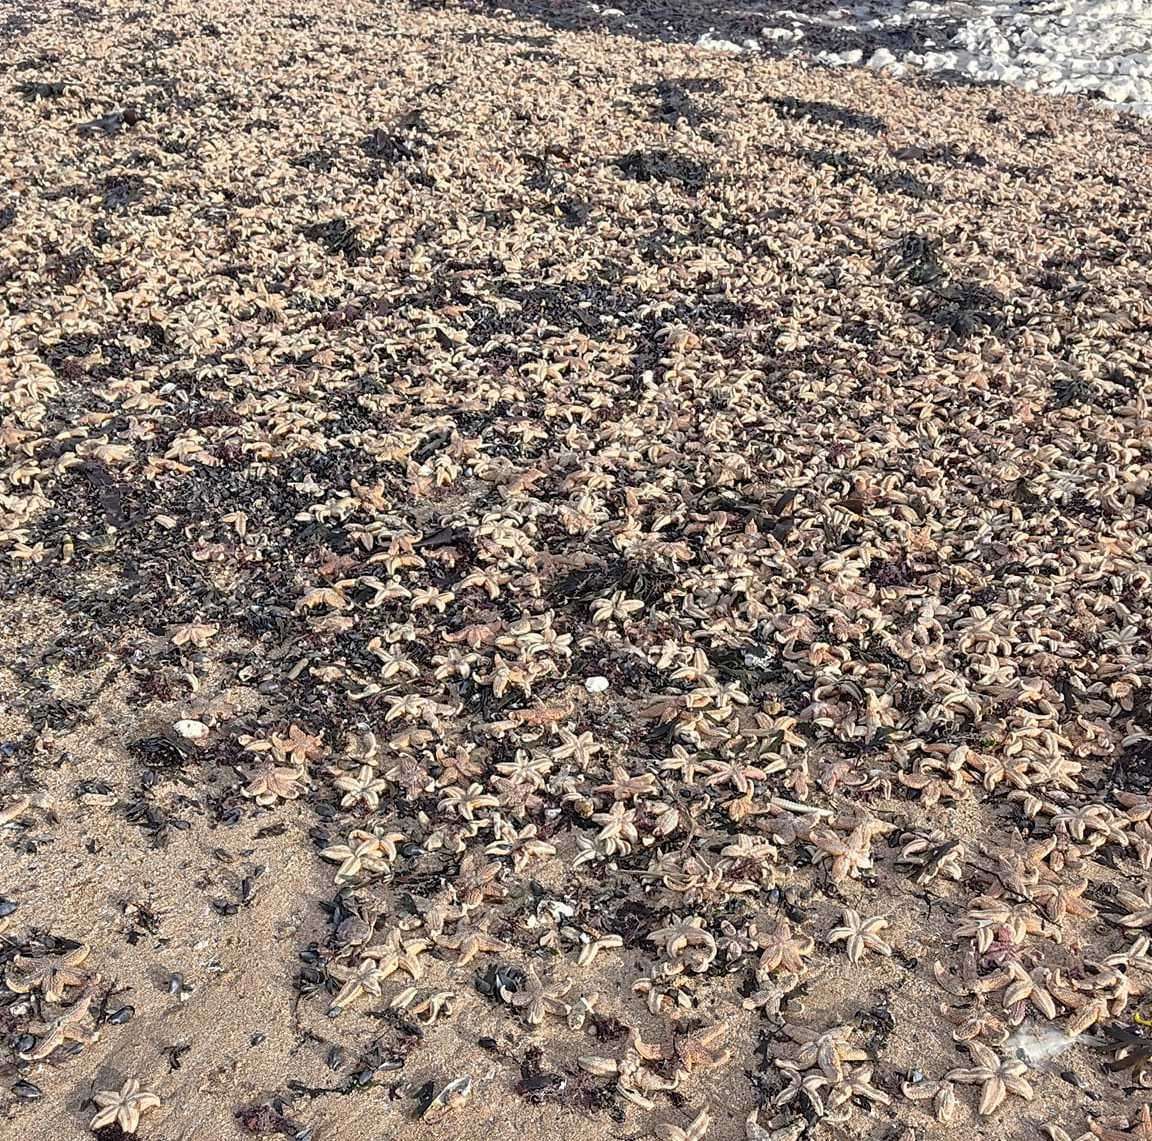 Thousands of dead starfish have washed up on a beach near Walpole Bay in Margate. Picture: Andy Freeman